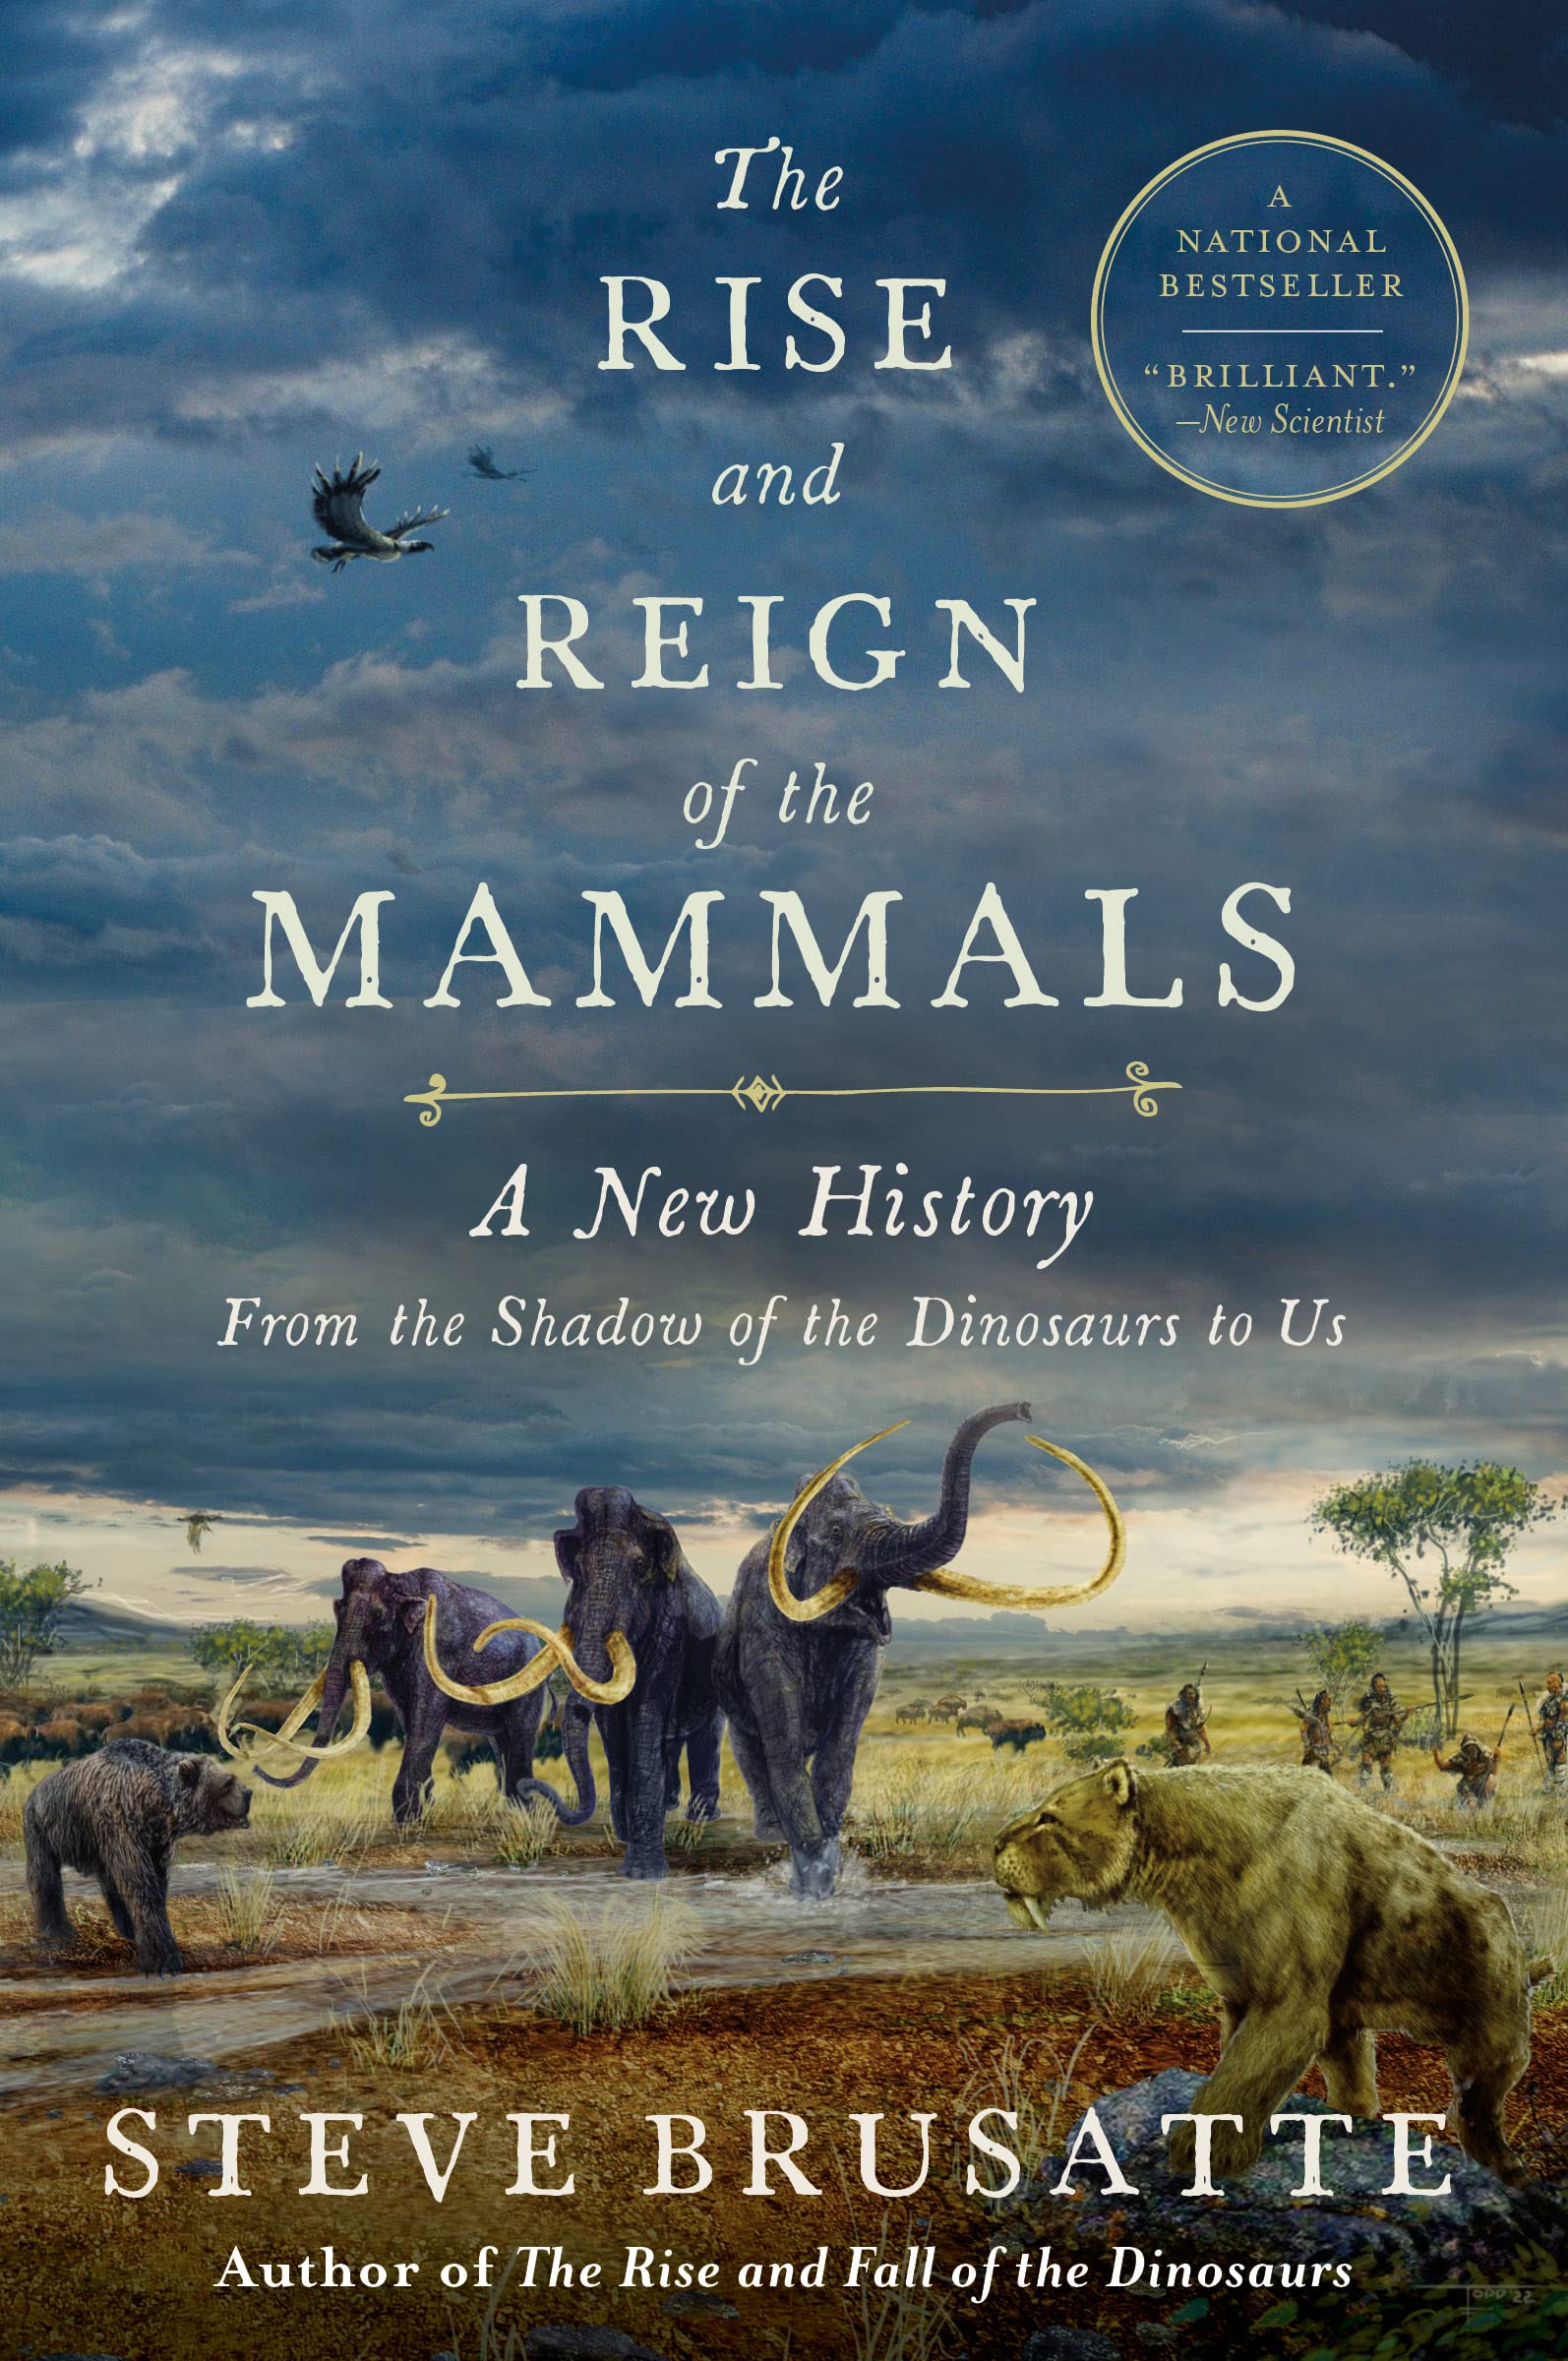 The Rise and Reign of the Mammals: A New History, from the Shadow of the Dinosaurs to Us (eBook) by Steve Brusatte $2.99